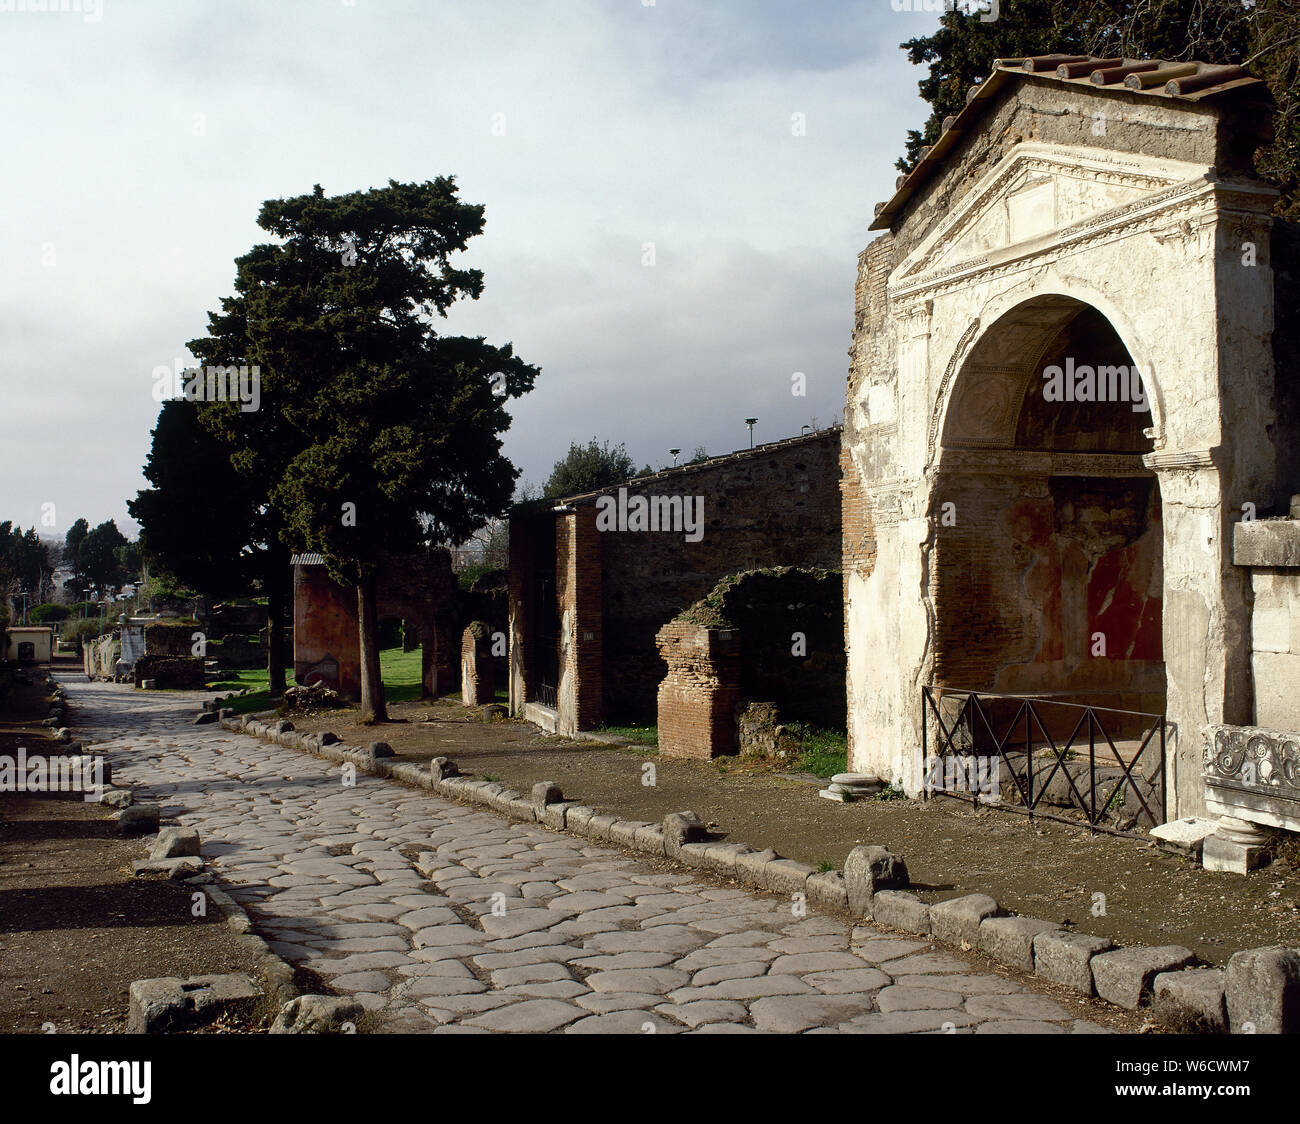 Italy. Pompeii. Street of Tombs (Via dei Sepolcri). There were tombs, commercial buildings and villas on both sides of the road. It was a large and important cemetery area. La Campania. Stock Photo